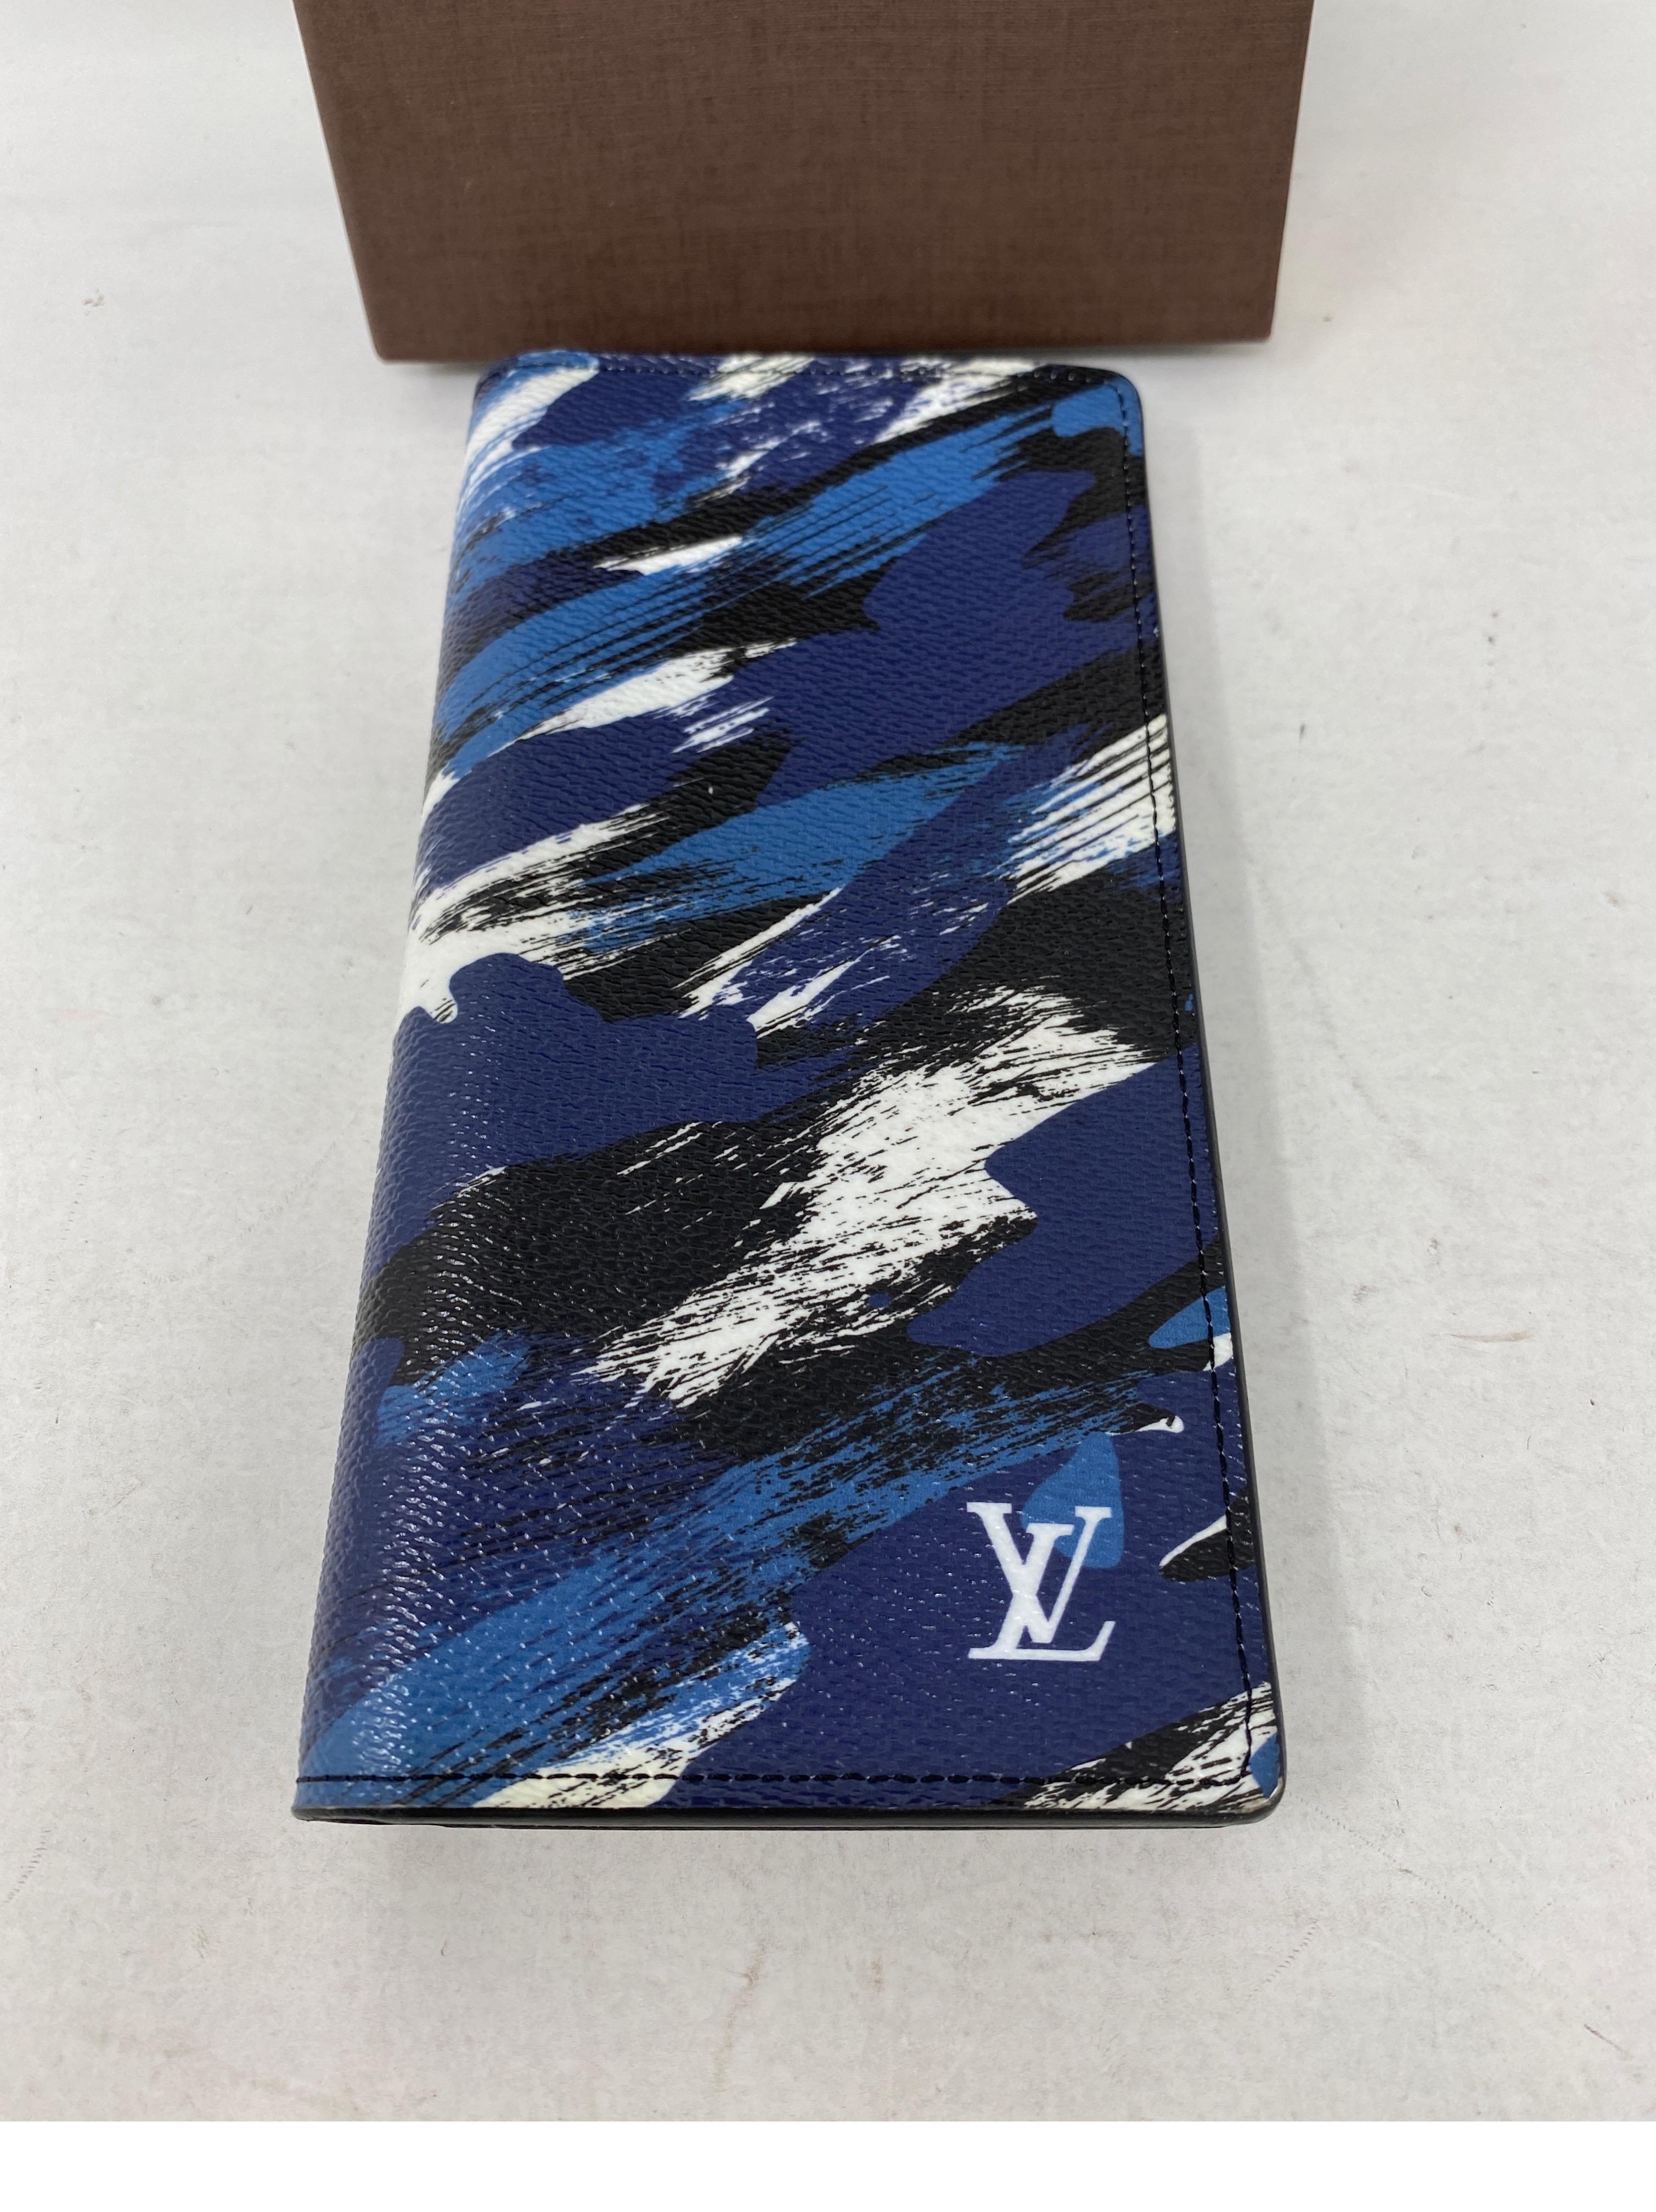 Louis Vuitton Limited Edition Wallet. Mod art style painterly design. Rare and limited collection. Excellent lik new condition. Guaranteed authentic. 